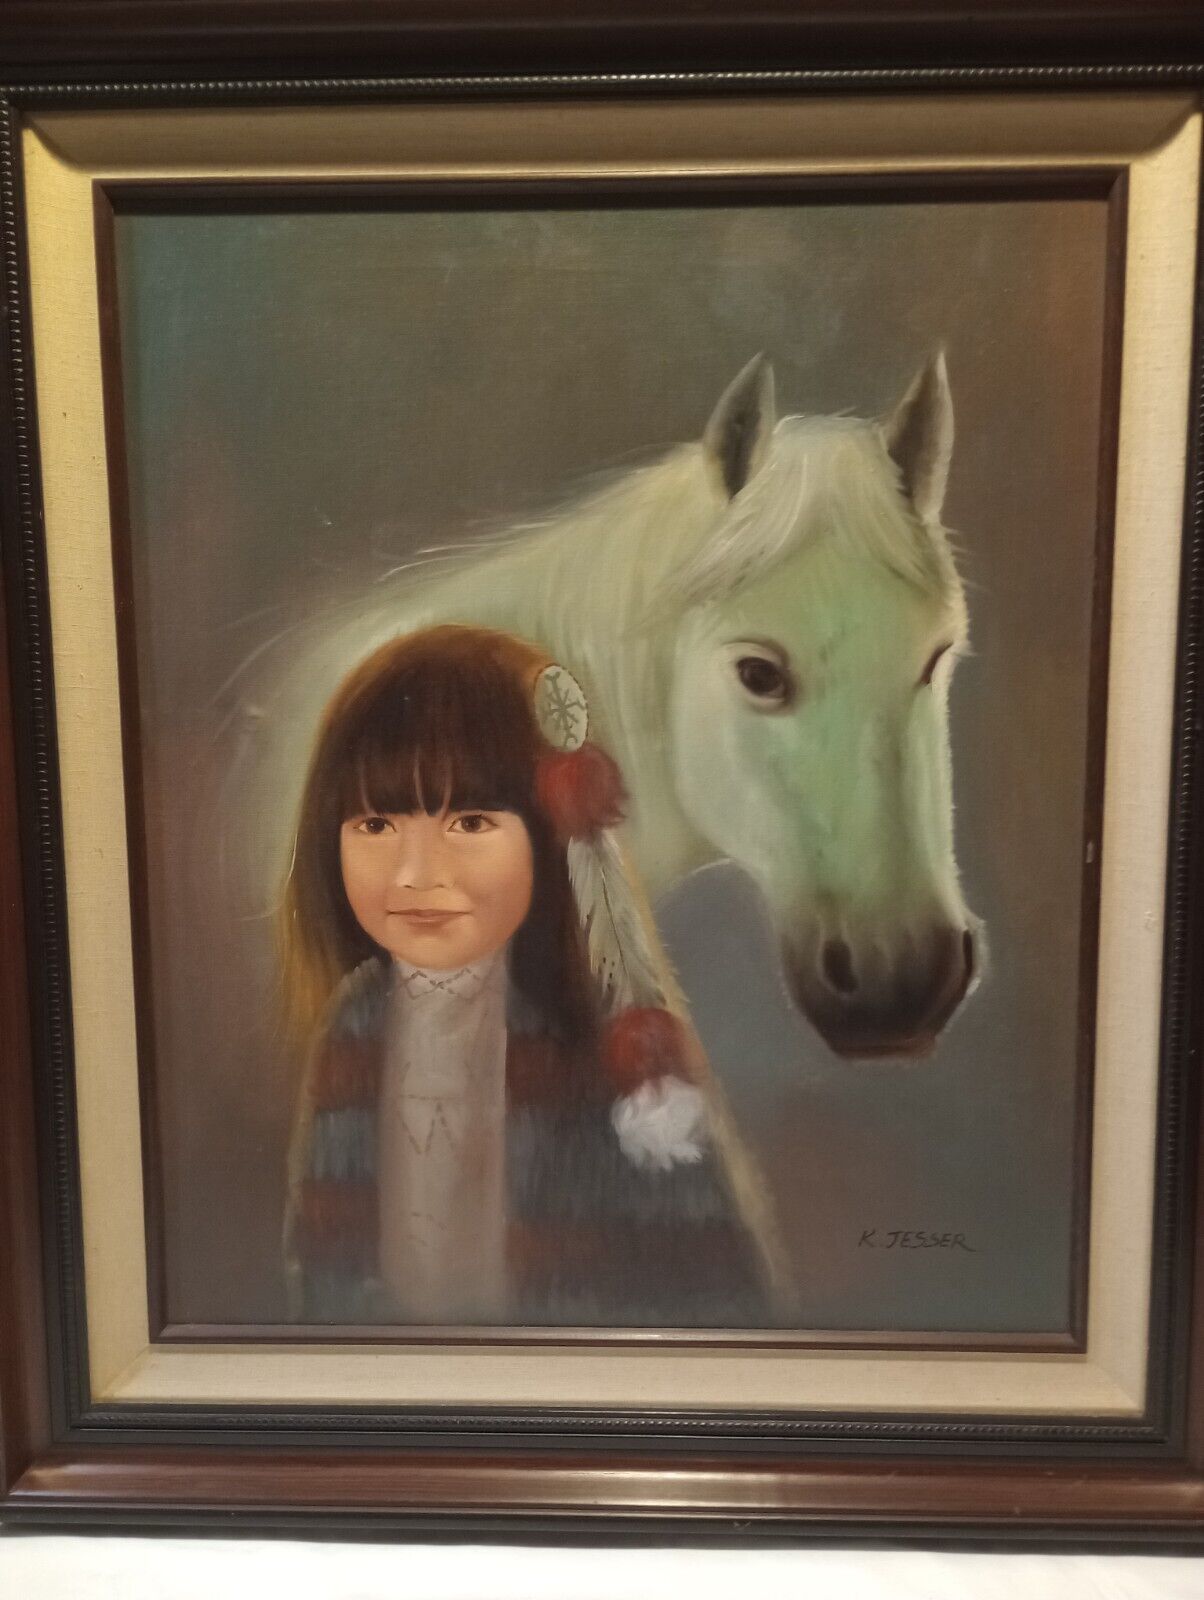 Vintage K. Jesser Oil Painting Native American Child Wi/ Whtie Horse16x20